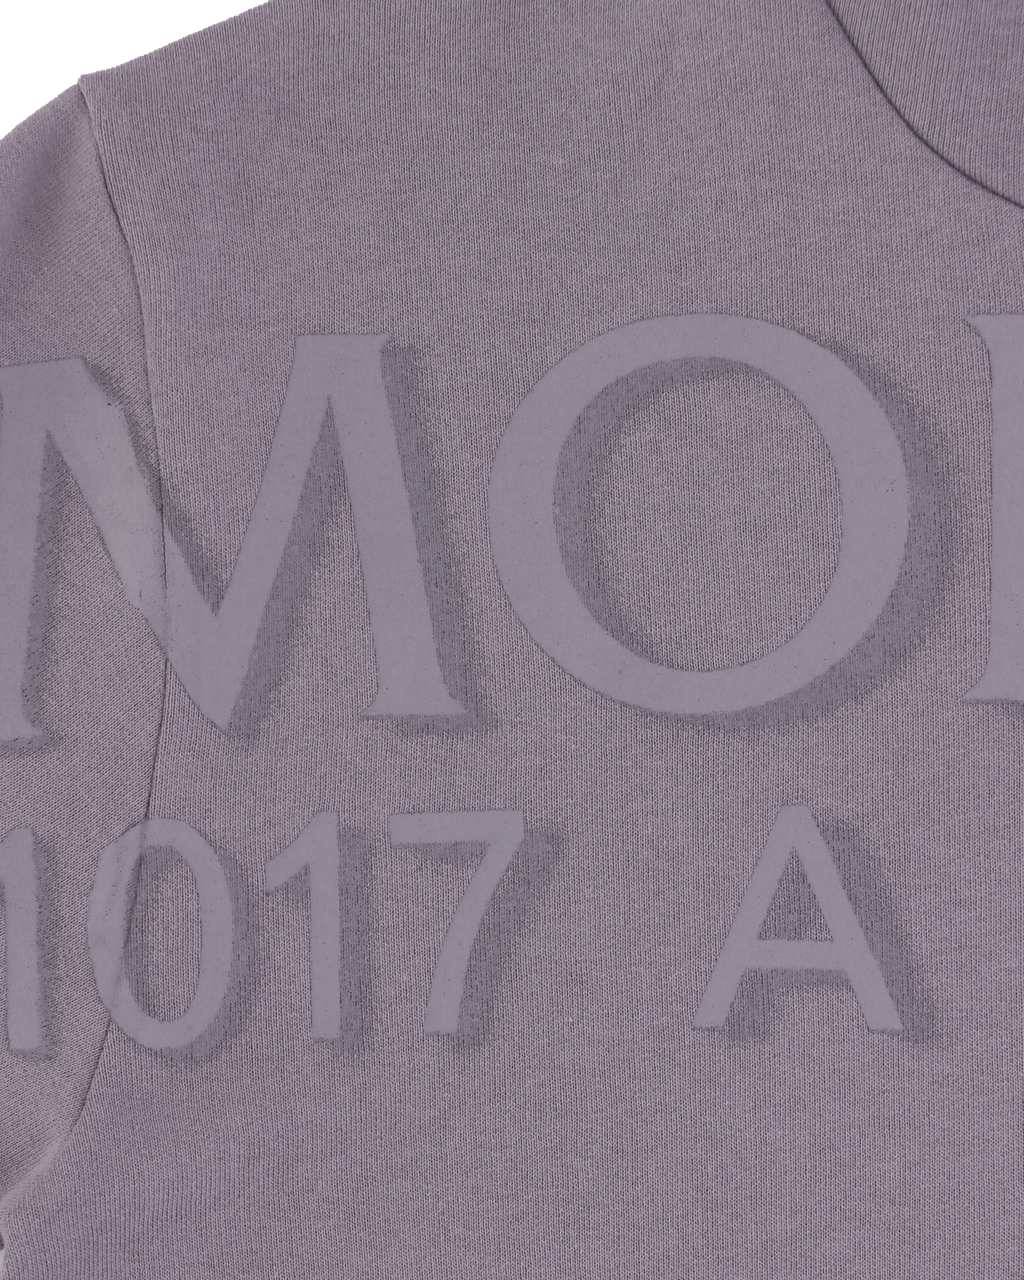 6 MONCLER 1017 ALYX 9SM HOODIE SWEATER